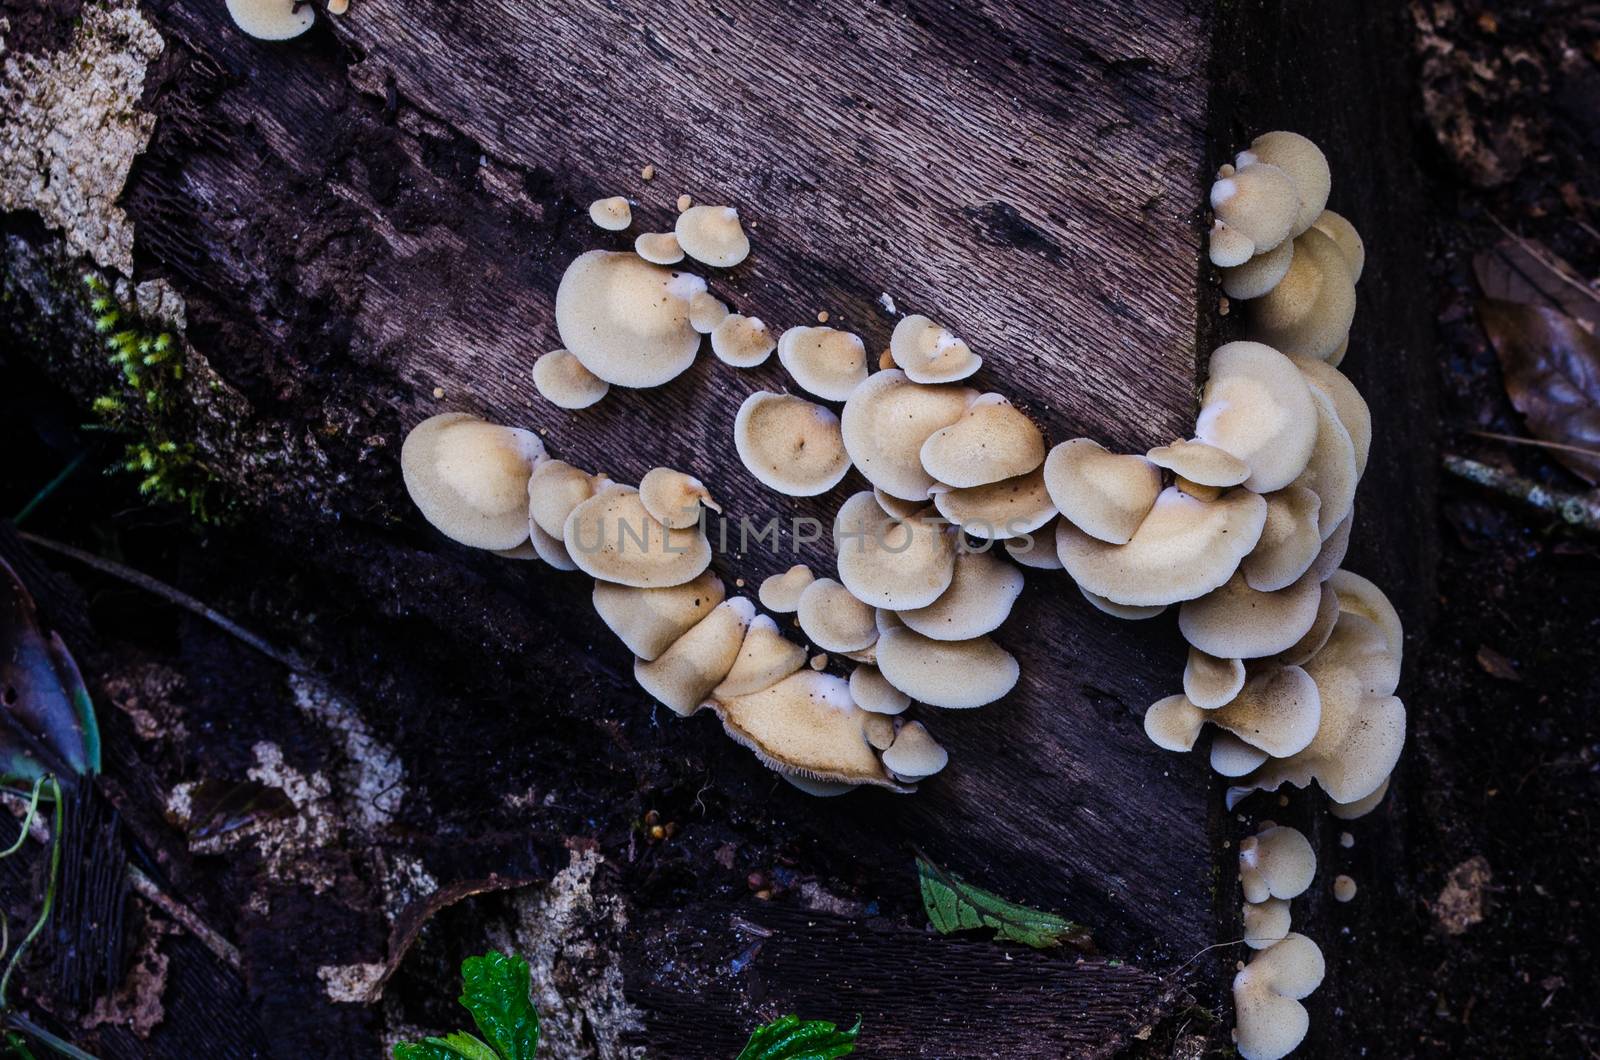 sulfur tuft mushrooms on a trunk in a woodland by photobyphotoboy